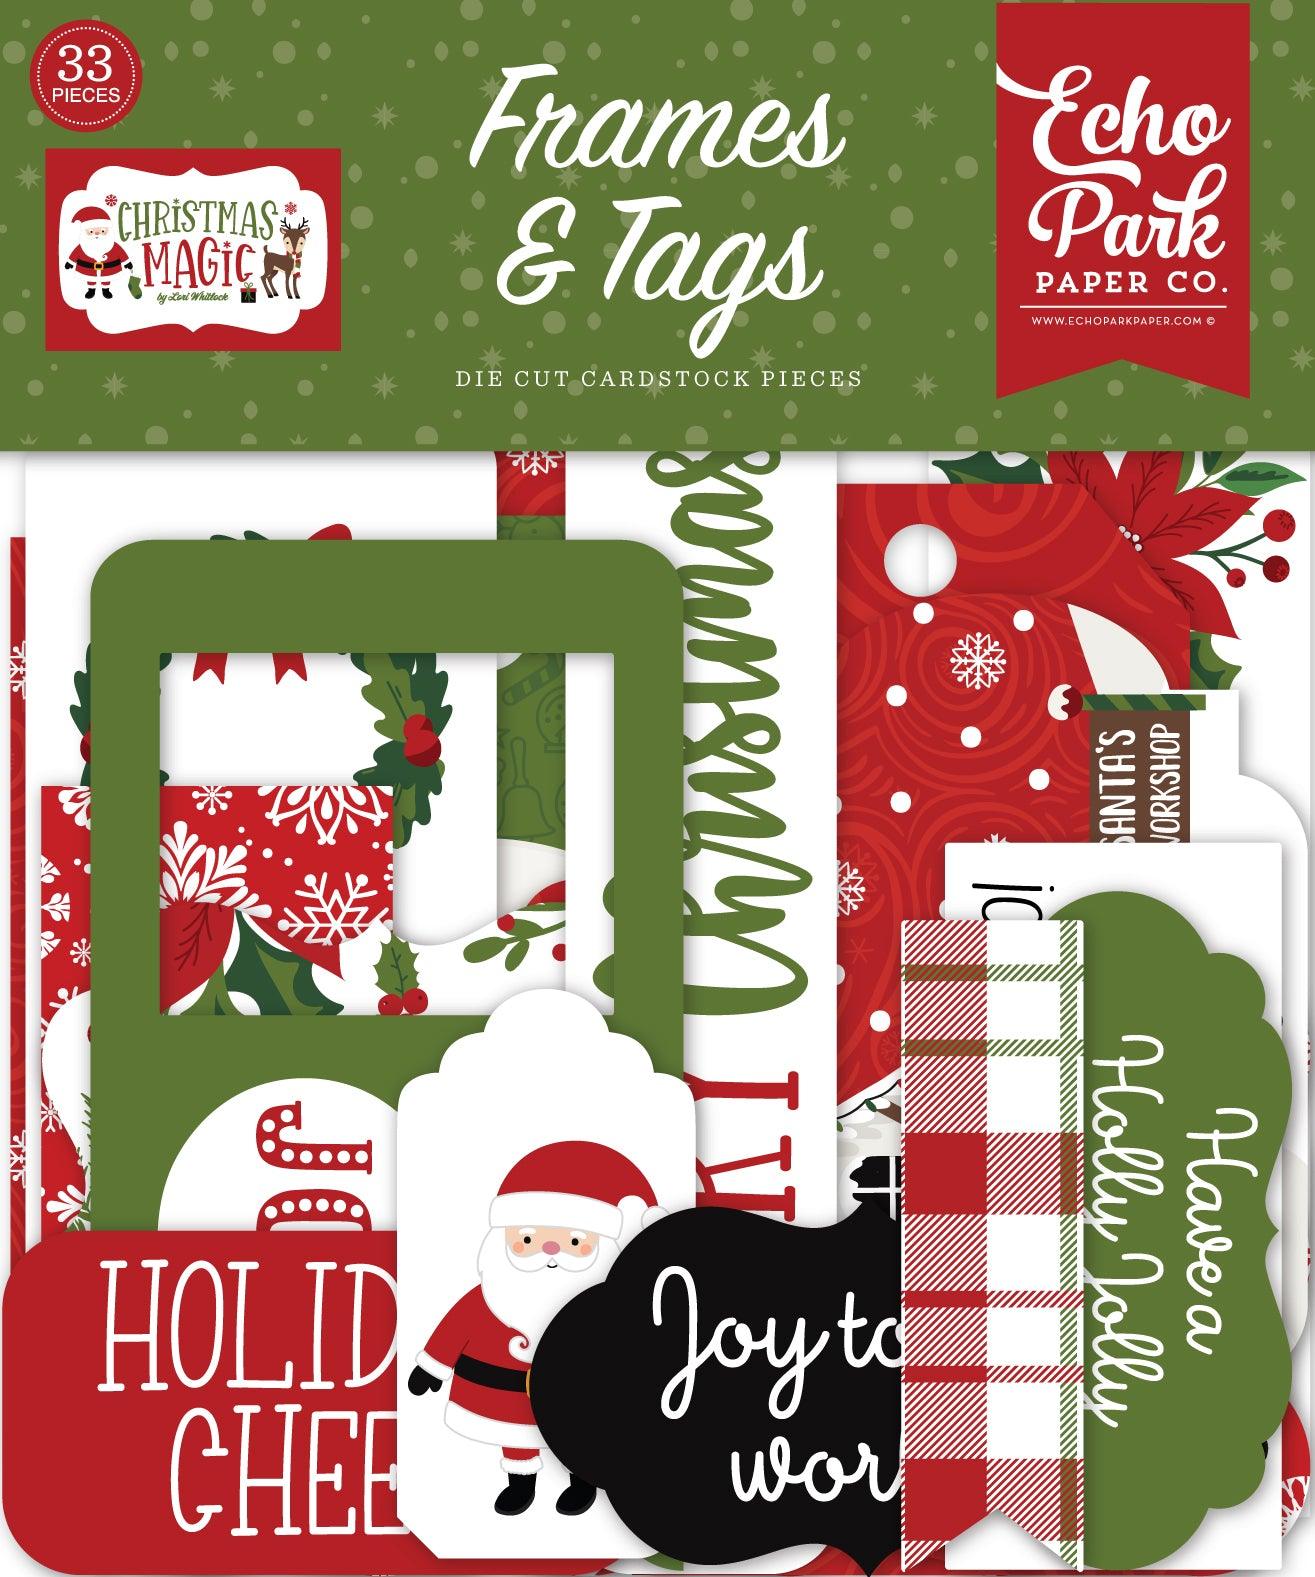 Christmas Magic Collection 5 x 5 Scrapbook Tags & Frames Die Cuts by Echo Park Paper - Scrapbook Supply Companies